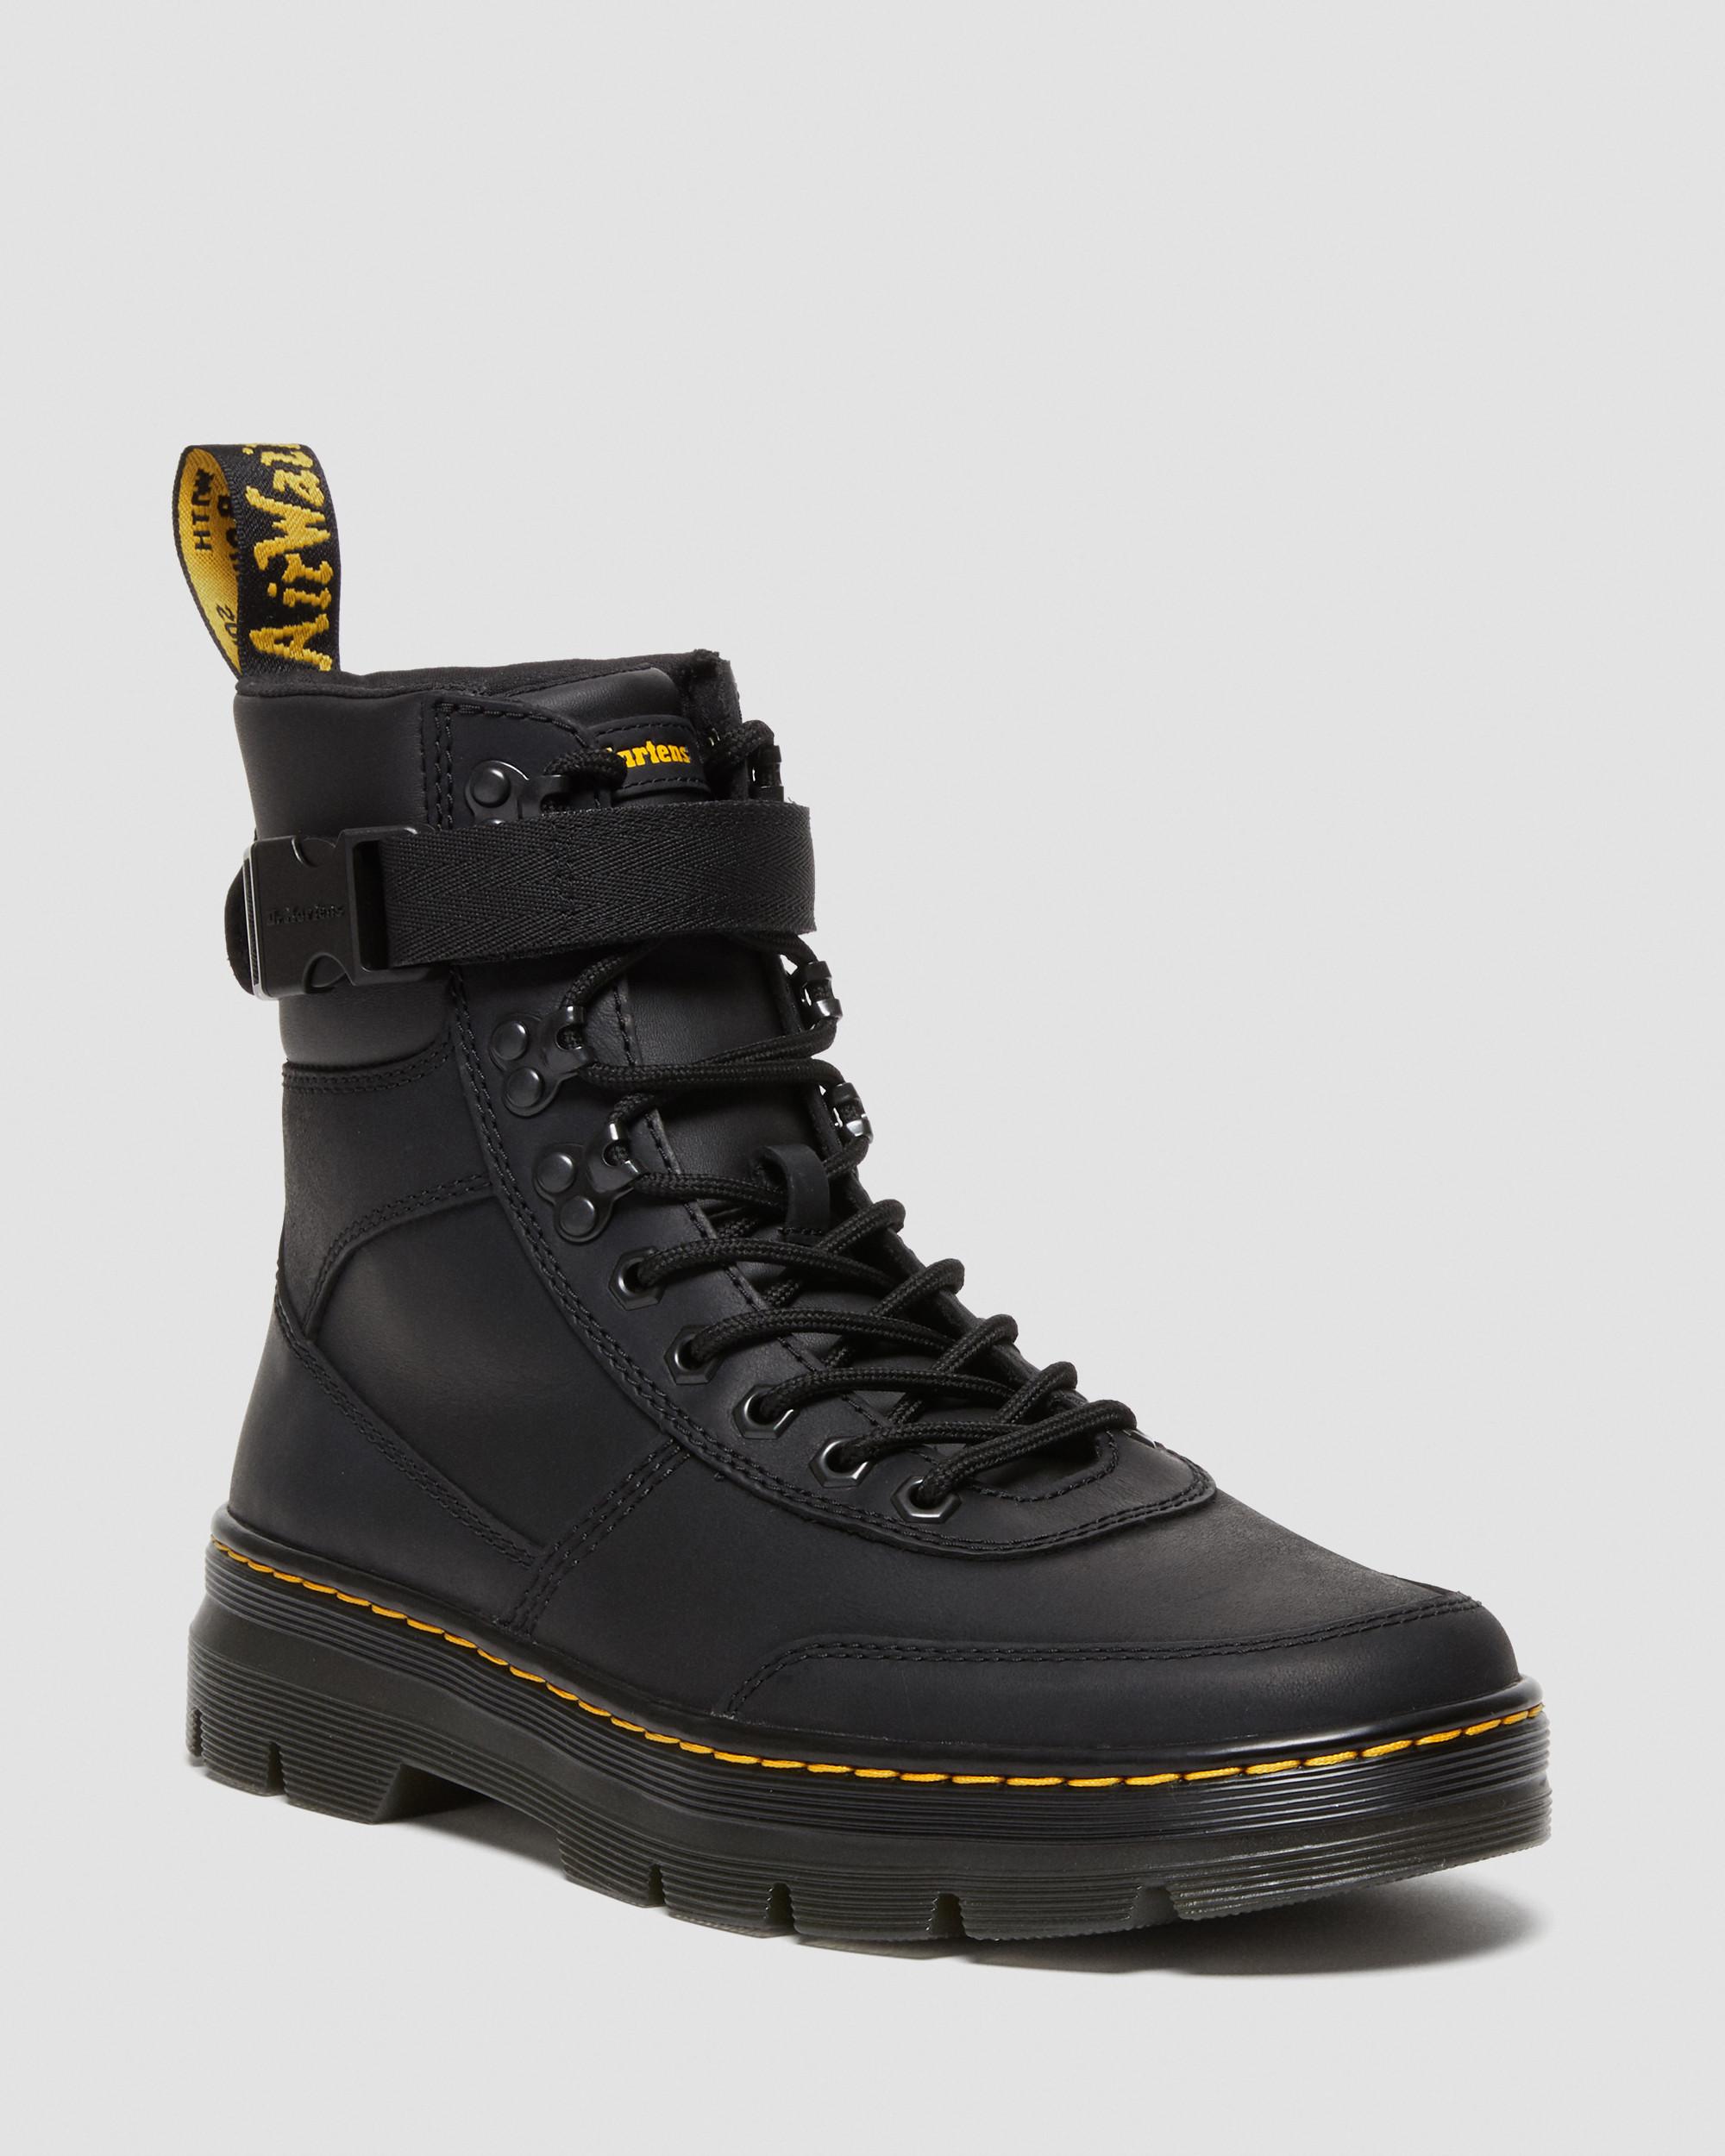 Combs Tech | Boots Black Leather Casual Dr. in Wyoming Martens